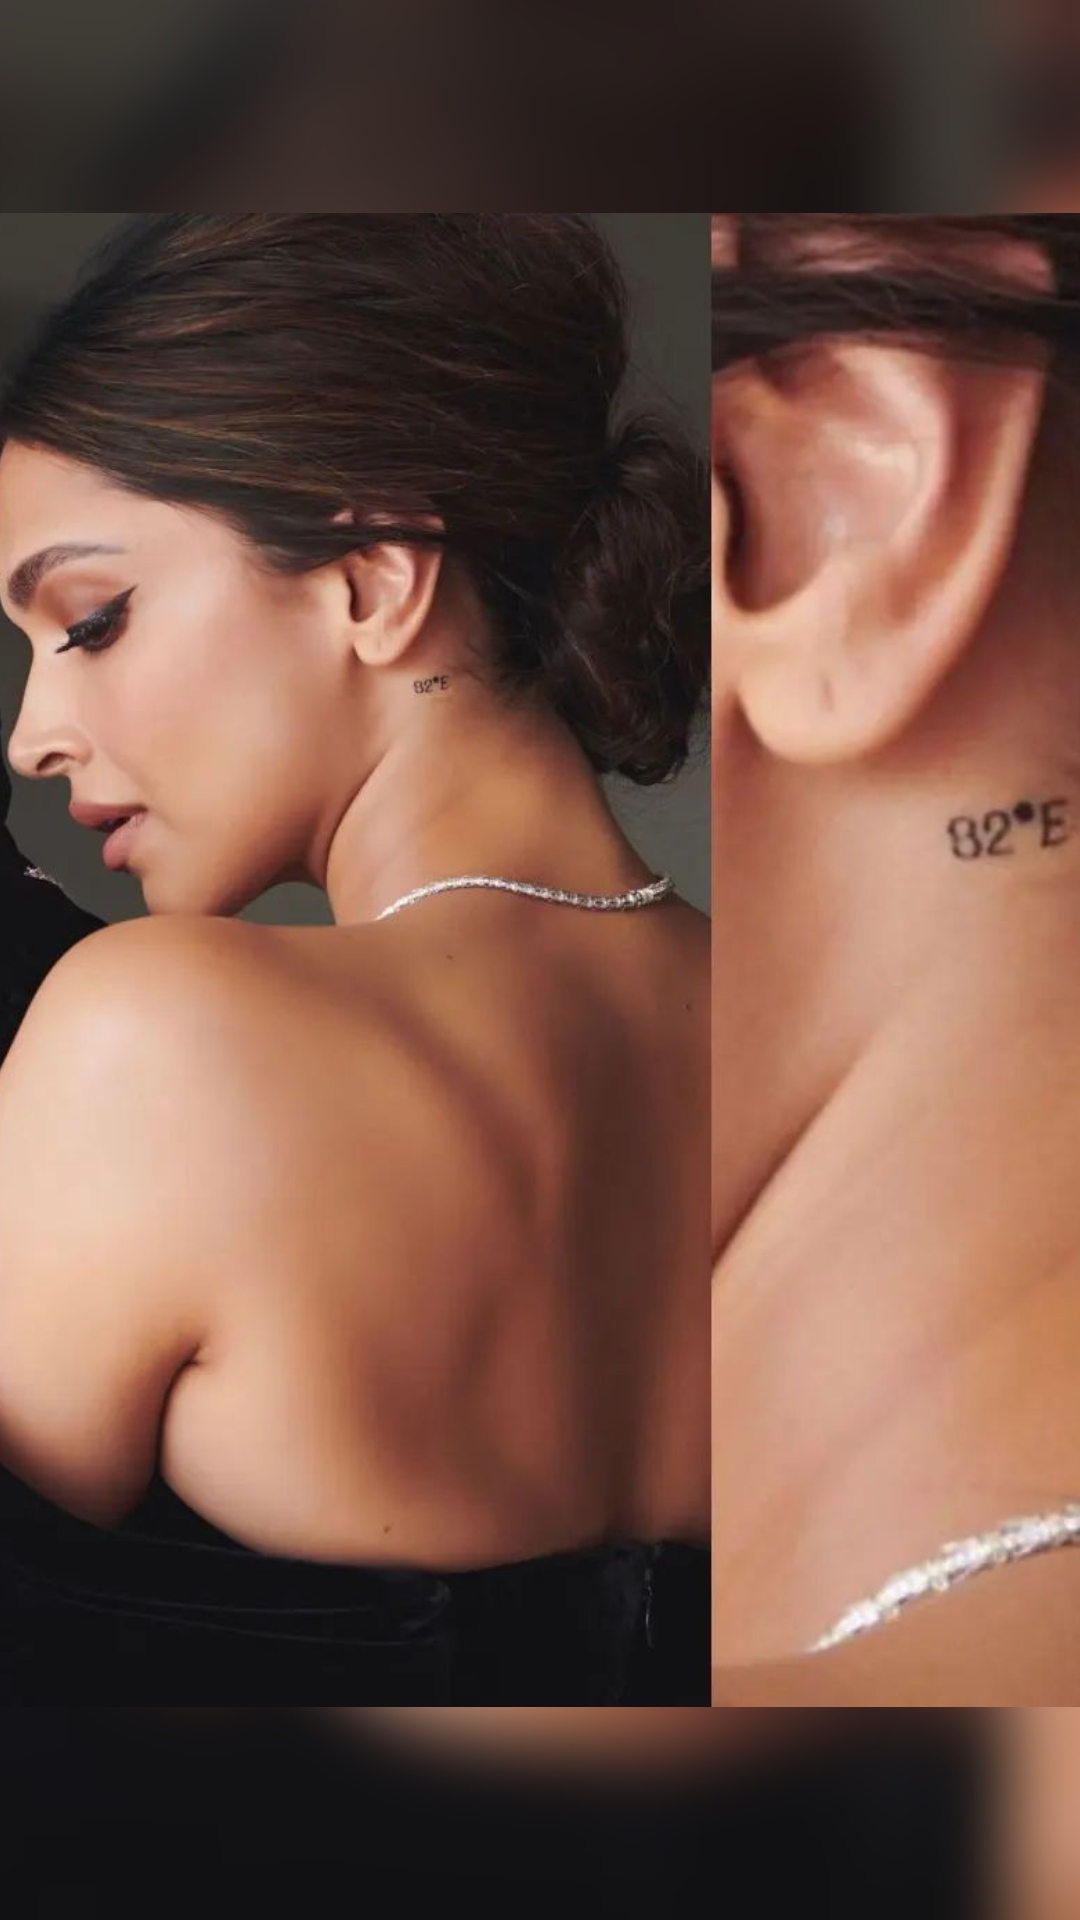 Did Deepika Padukone really get the 'RK' tattoo removed or is it make-up  again? - view pics - Bollywood News & Gossip, Movie Reviews, Trailers &  Videos at Bollywoodlife.com